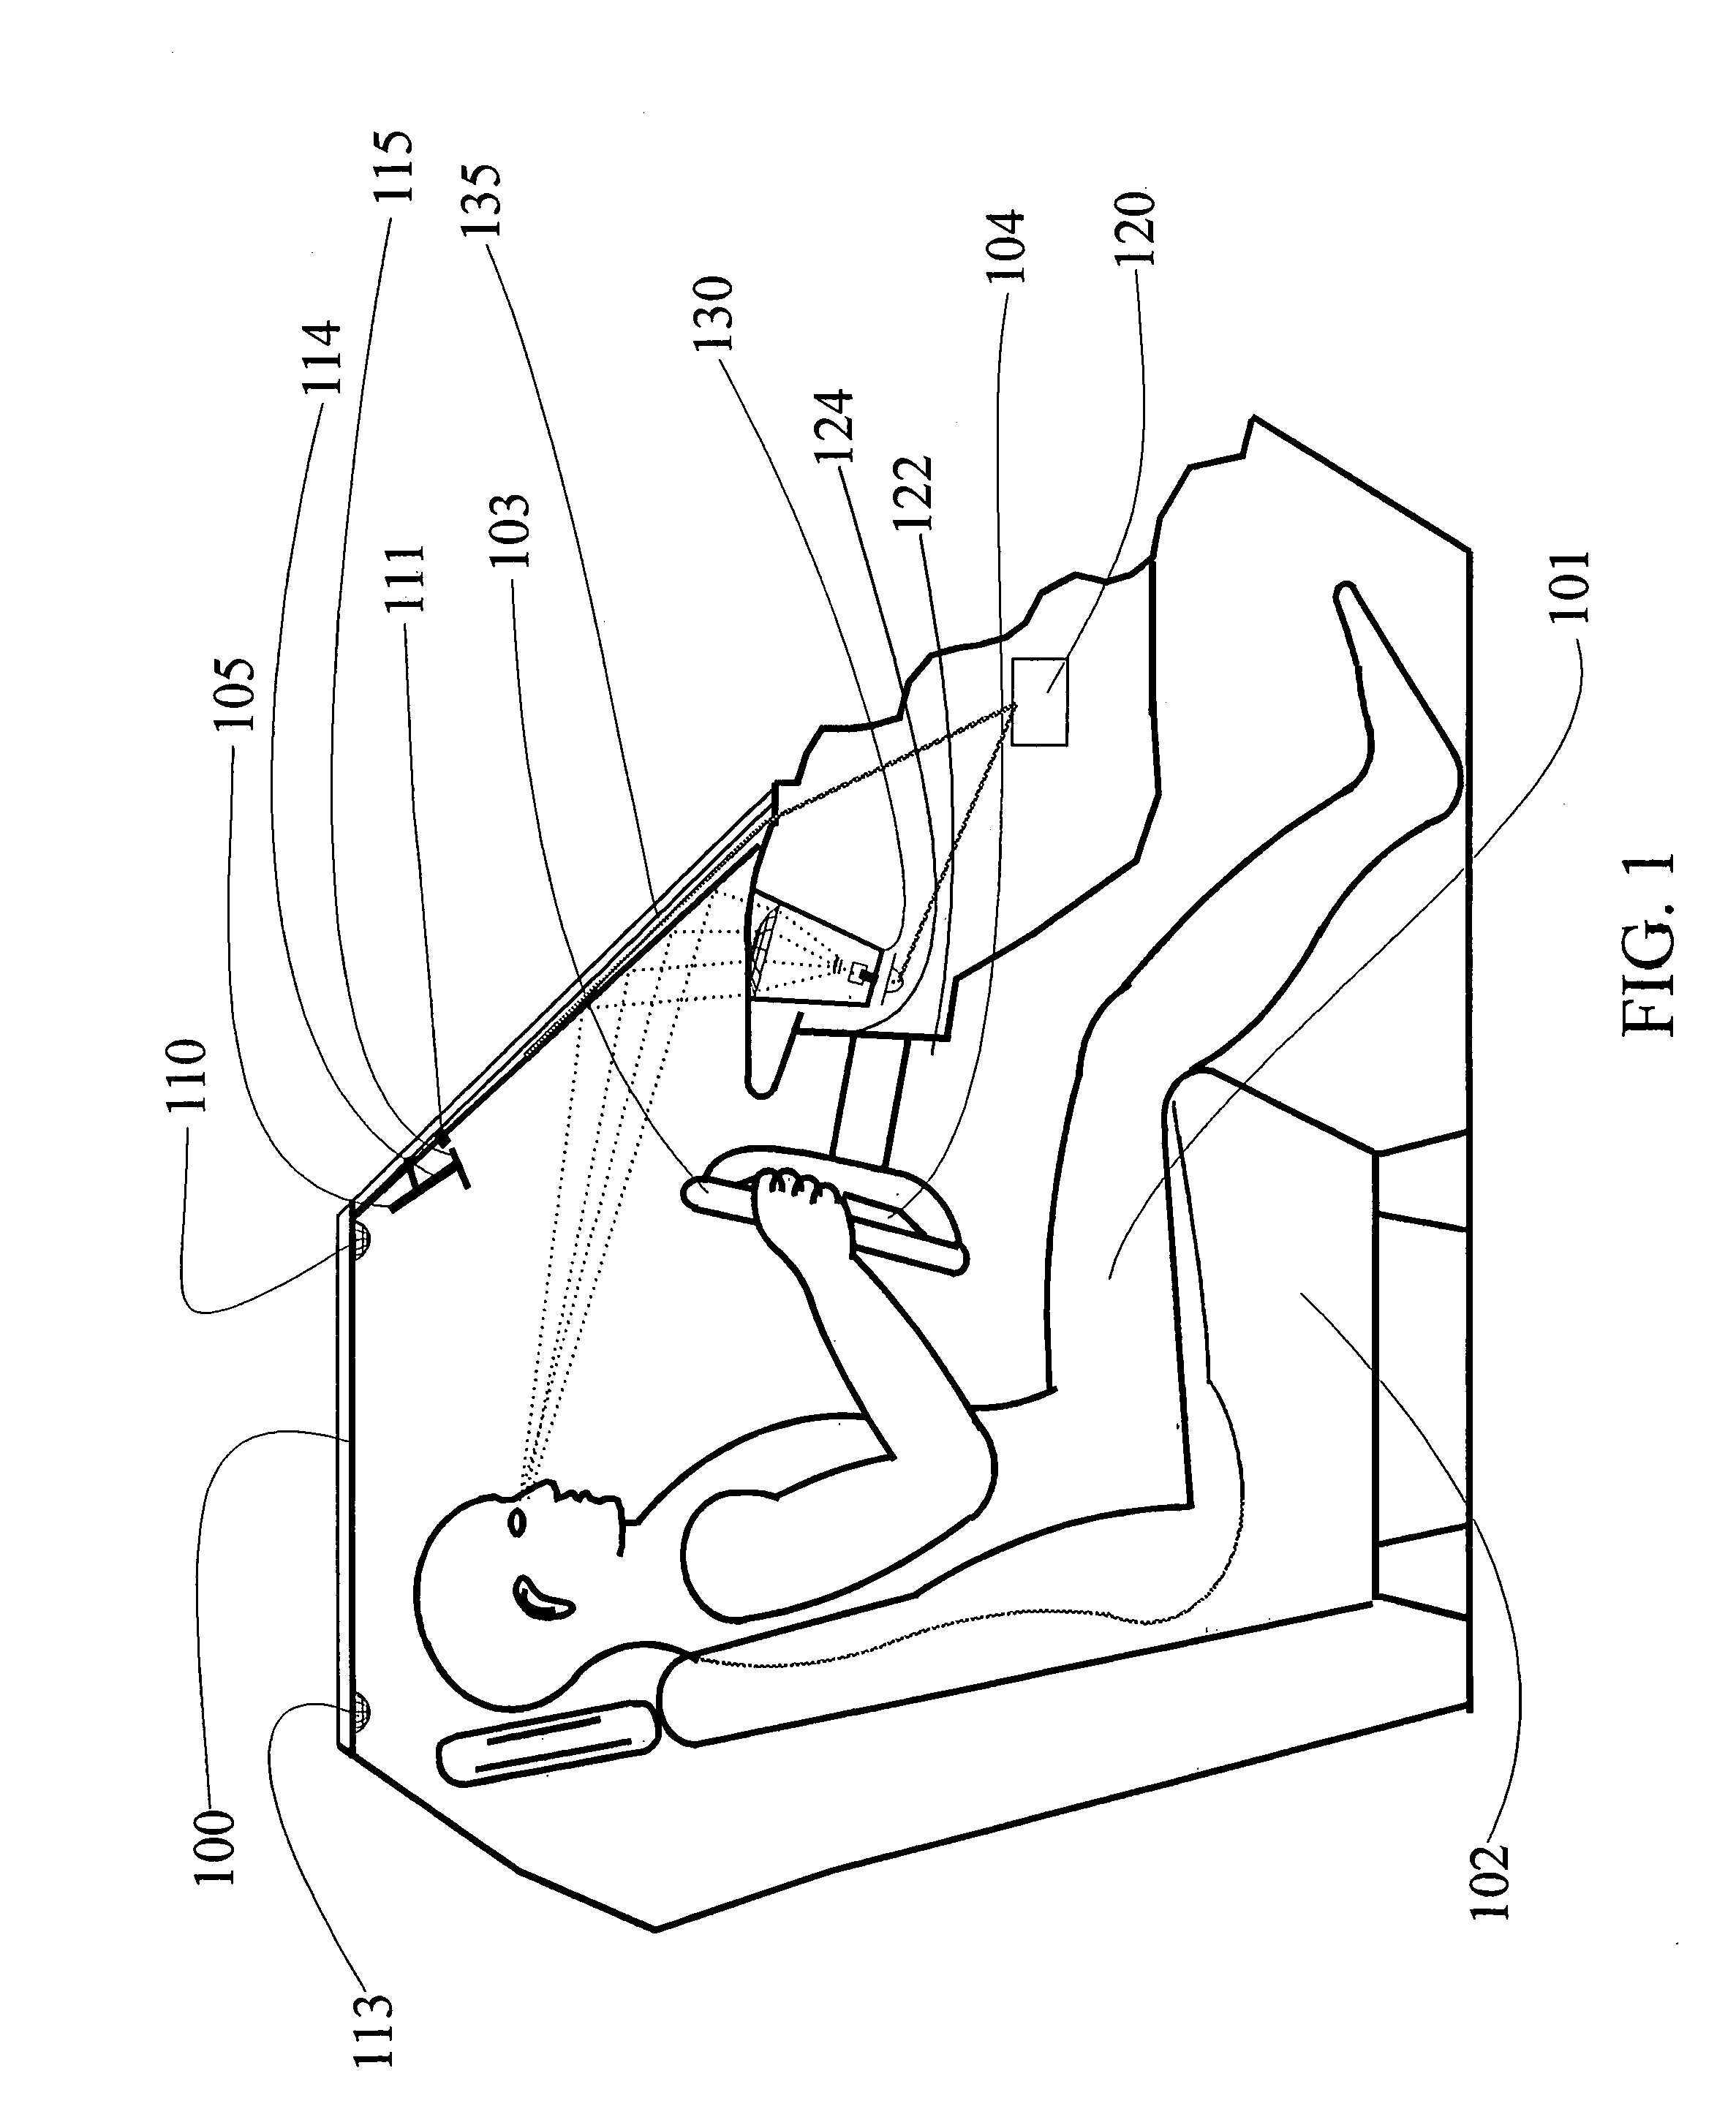 Interactive vehicle display system